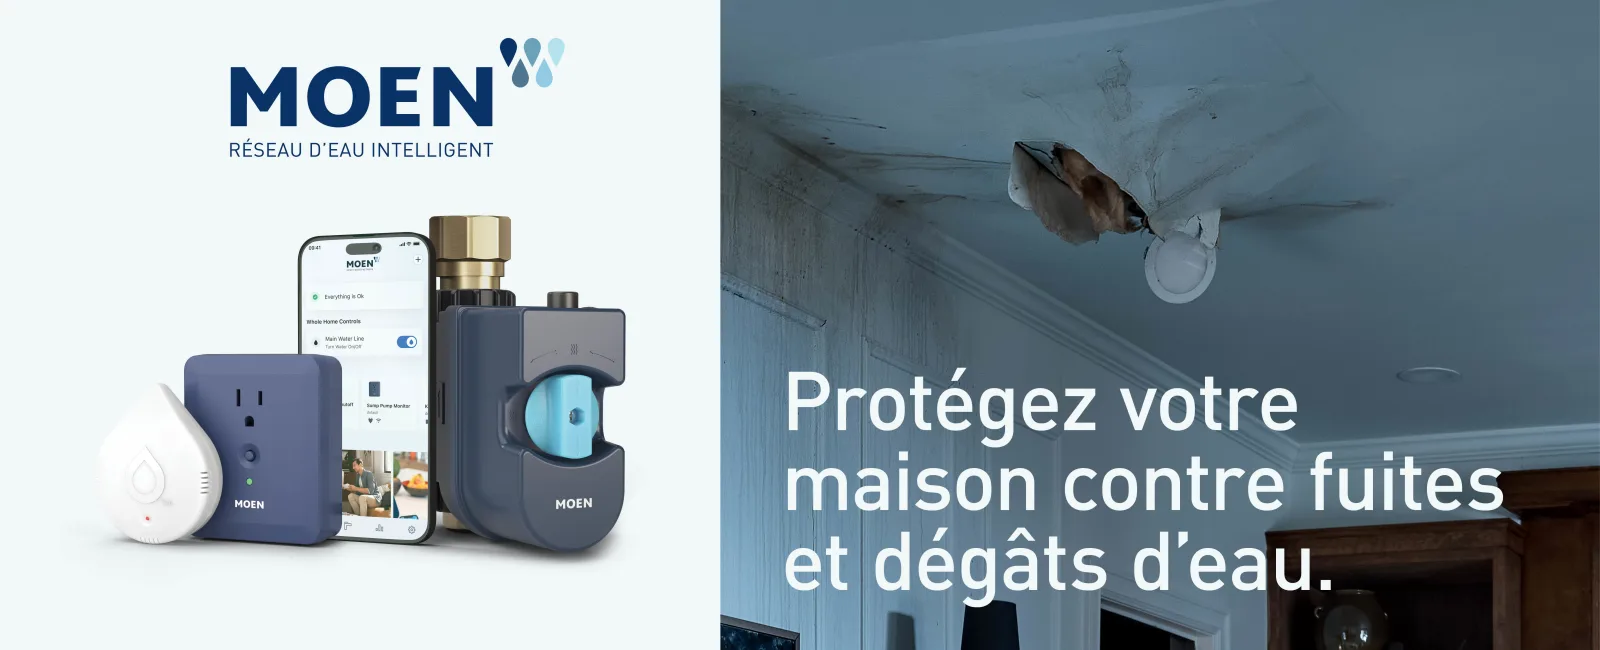 Moen - Brand Page - Smart Water Networks Image